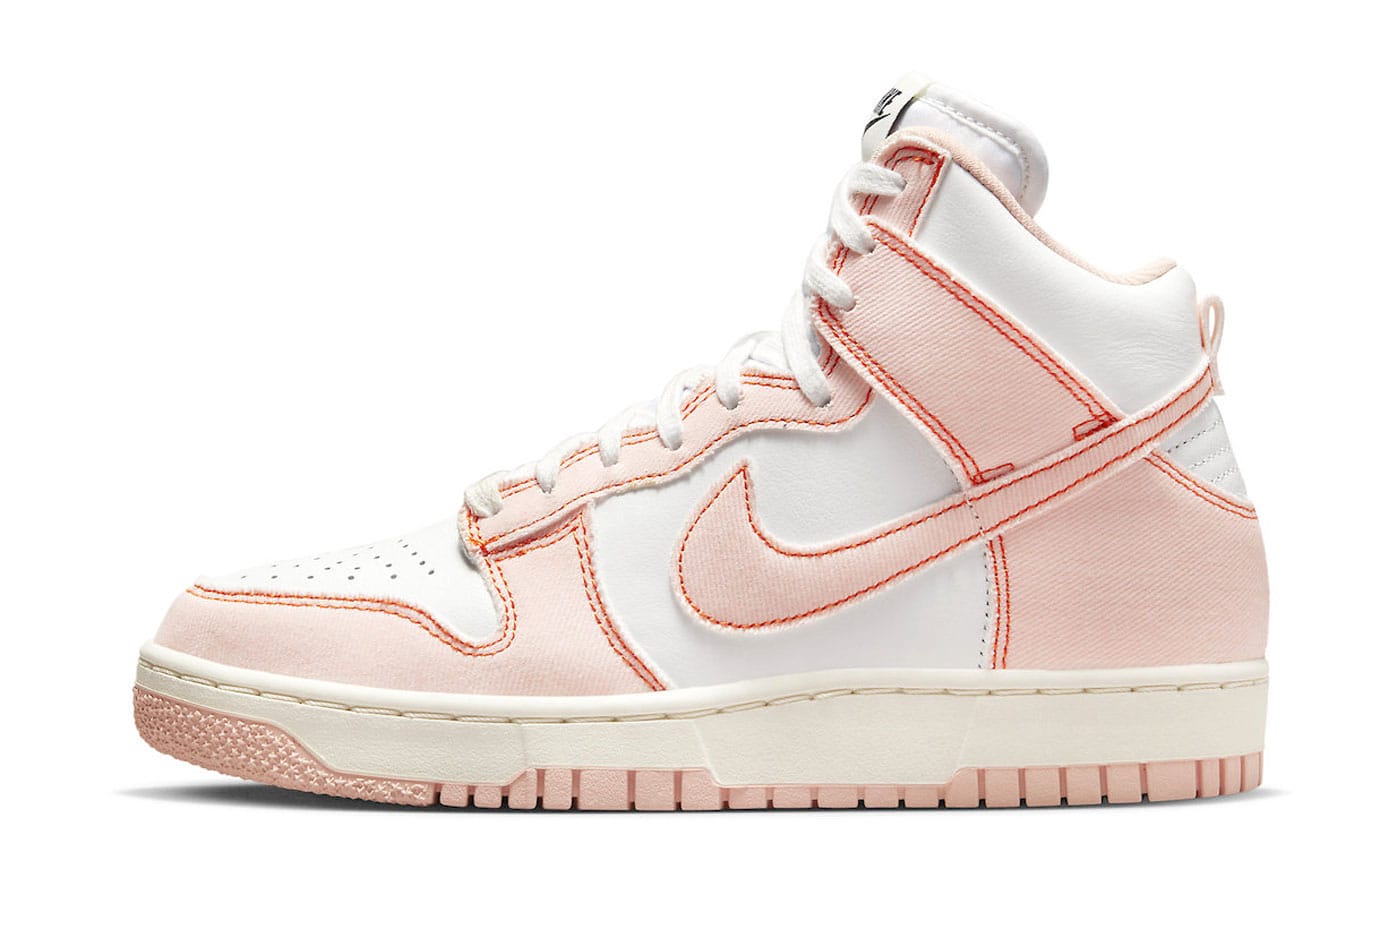 Official Images of the Nike Dunk High 1985 